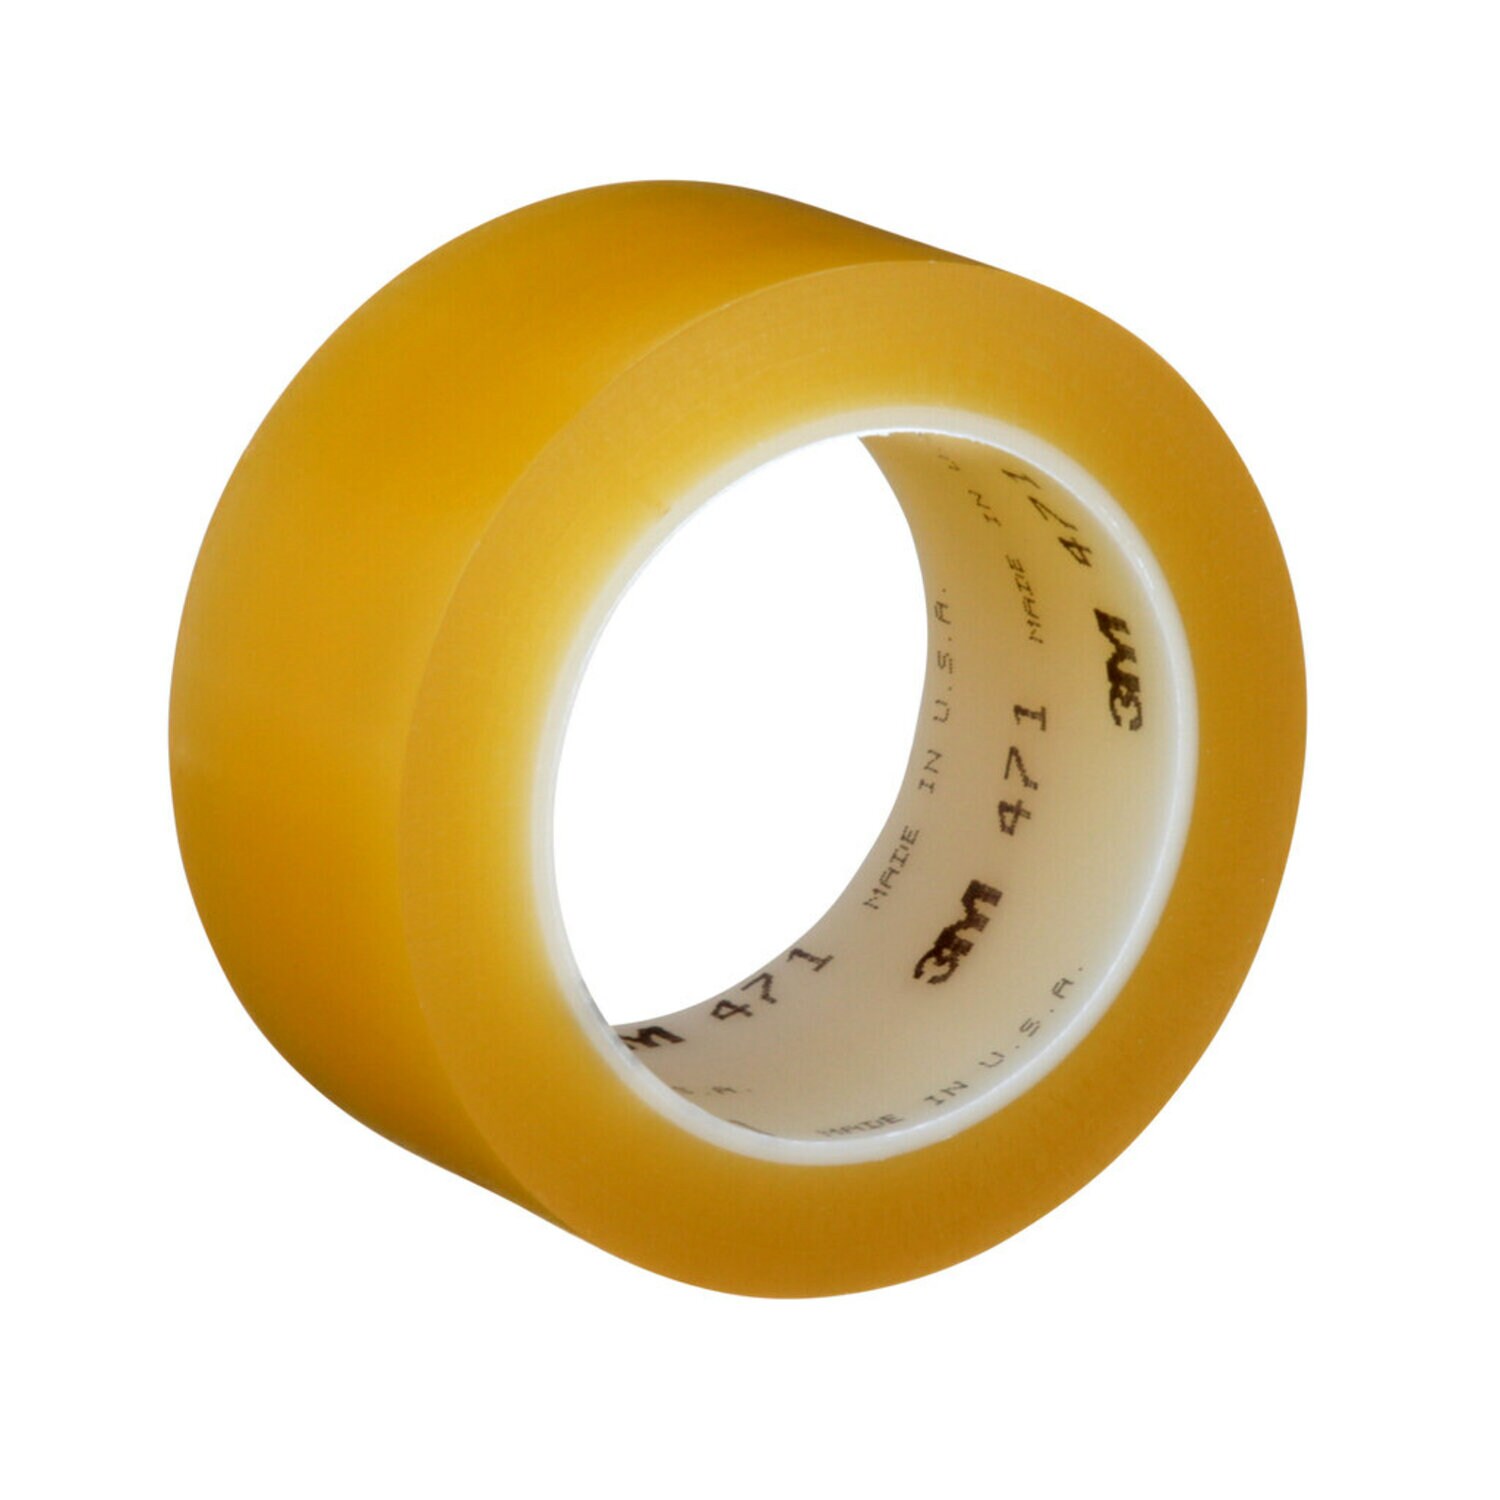 3M™ Paint Masking Tape 231/231A Tan 1-1/4 in x 60 yd 7.6 mil 32